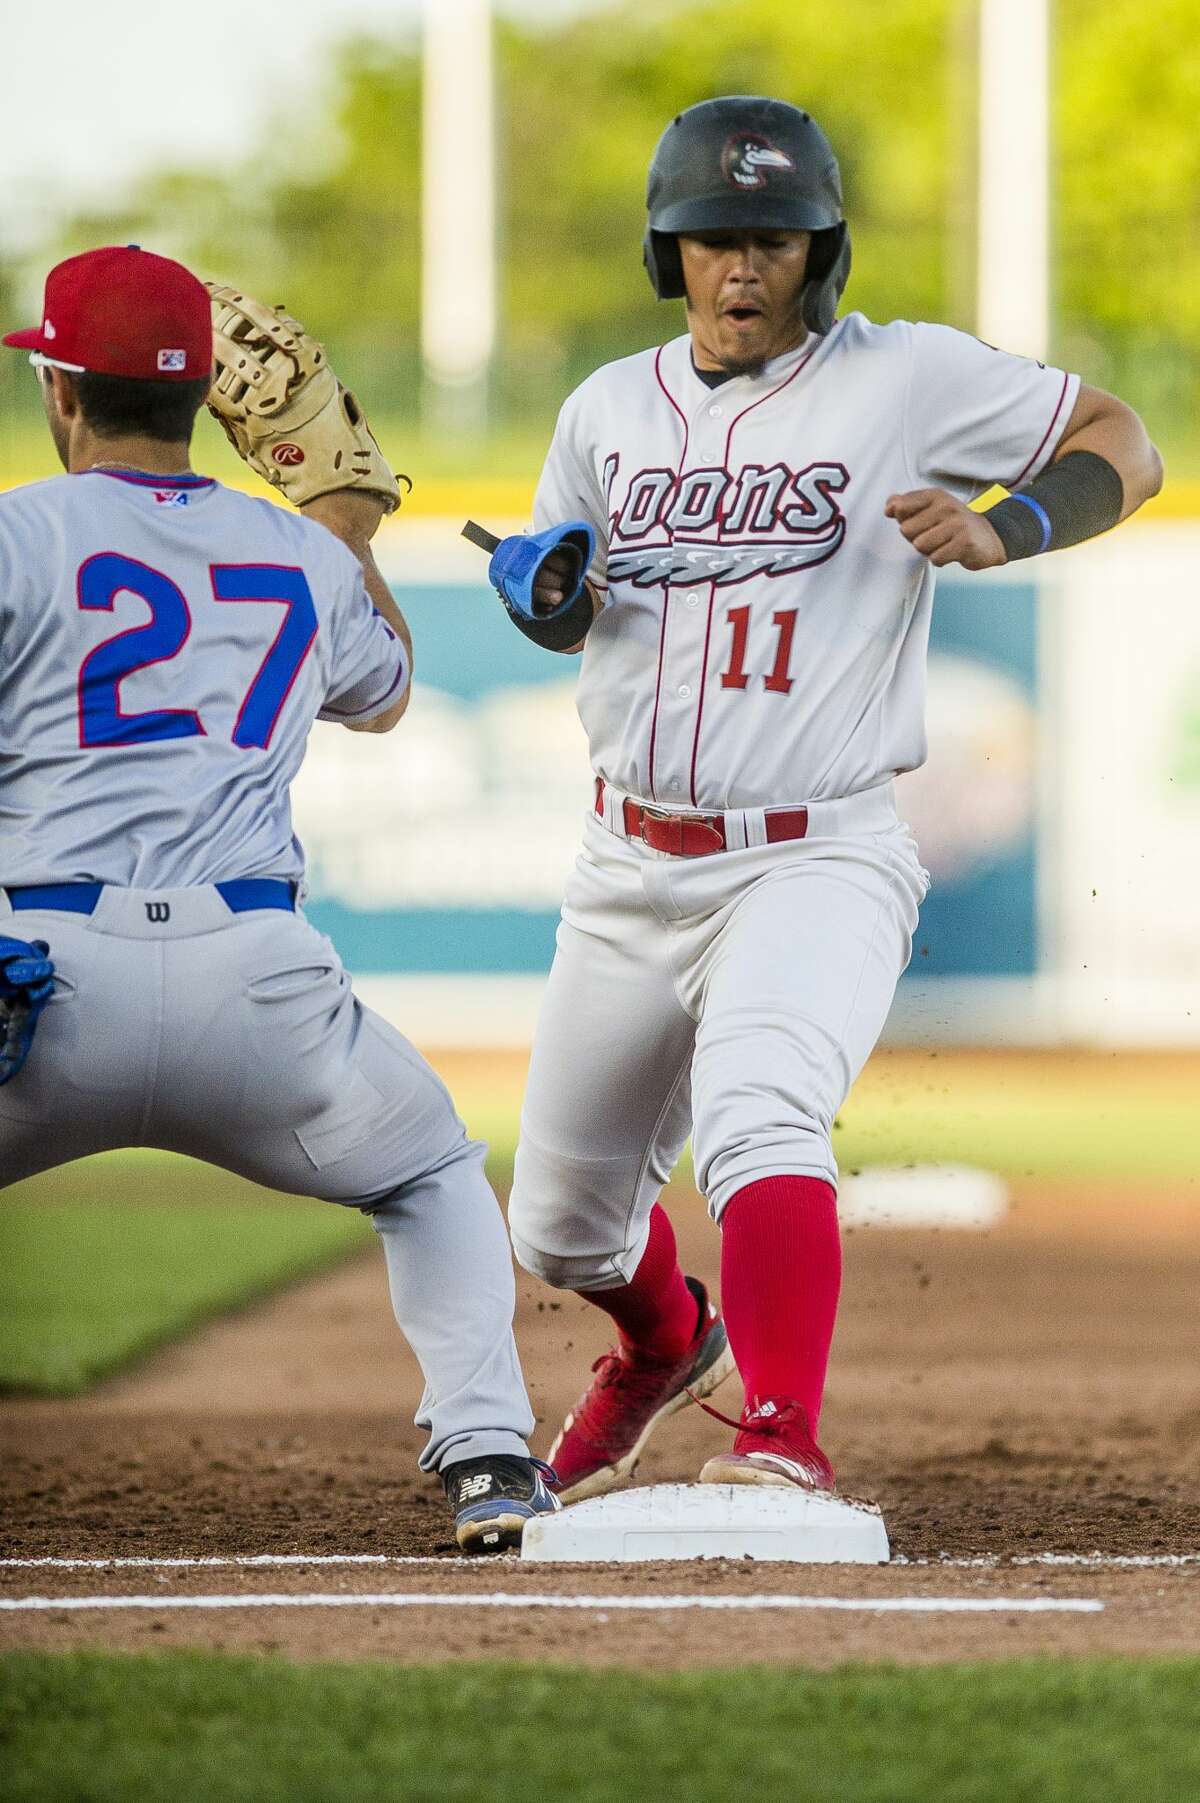 Great Lakes Loons third baseman Miguel Vargas runs back to first base during a game against the South Bend Cubs on Monday, June 10, 2019 at Dow Diamond. (Katy Kildee/kkildee@mdn.net)